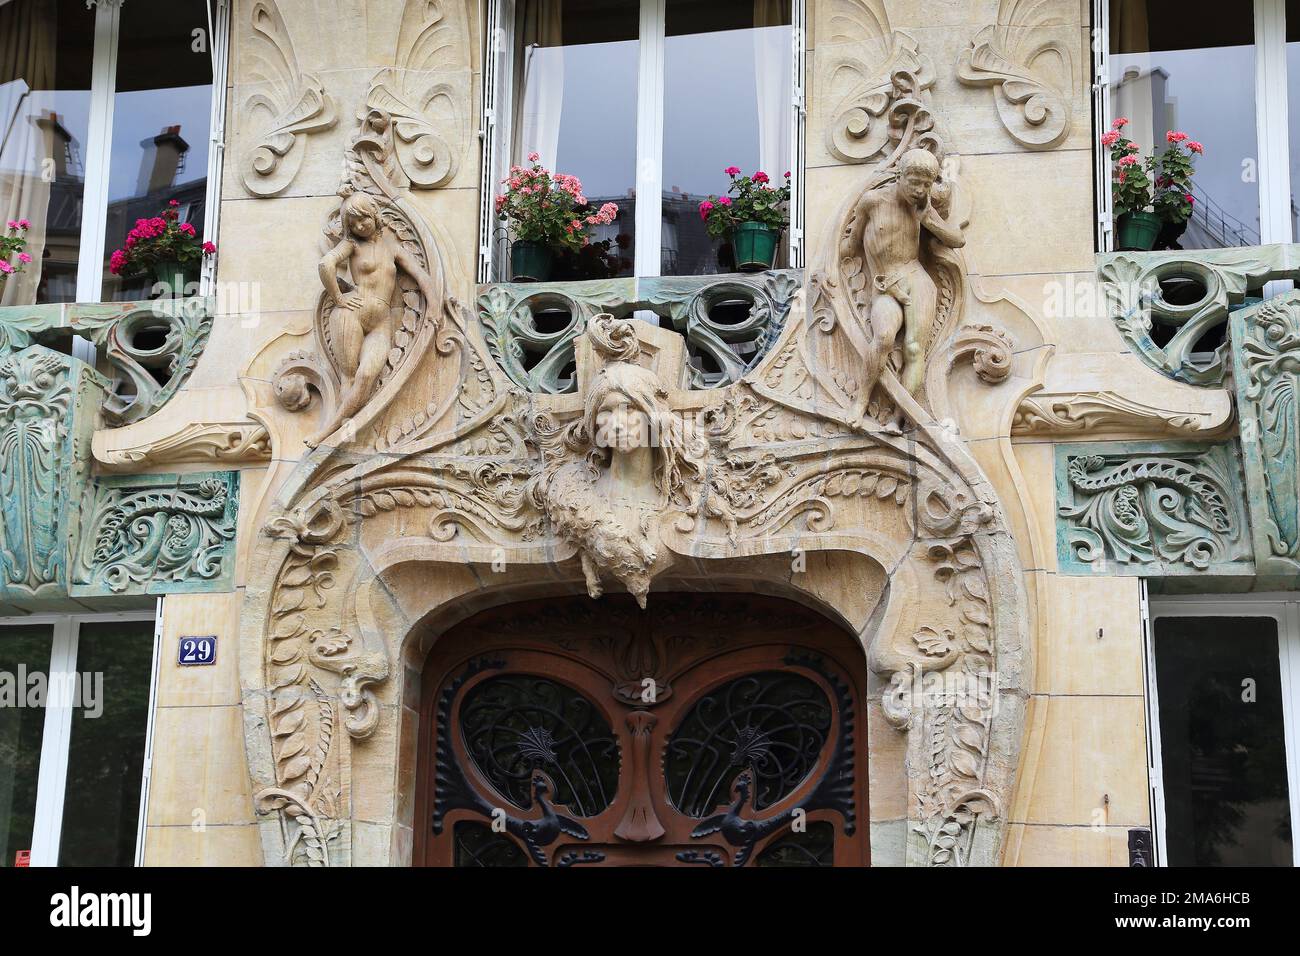 PARIS, FRANCE - MAY 12, 2015: This is a fragment of entrance of an apartment house Lavirotte built in the Art Nouveau style. Stock Photo